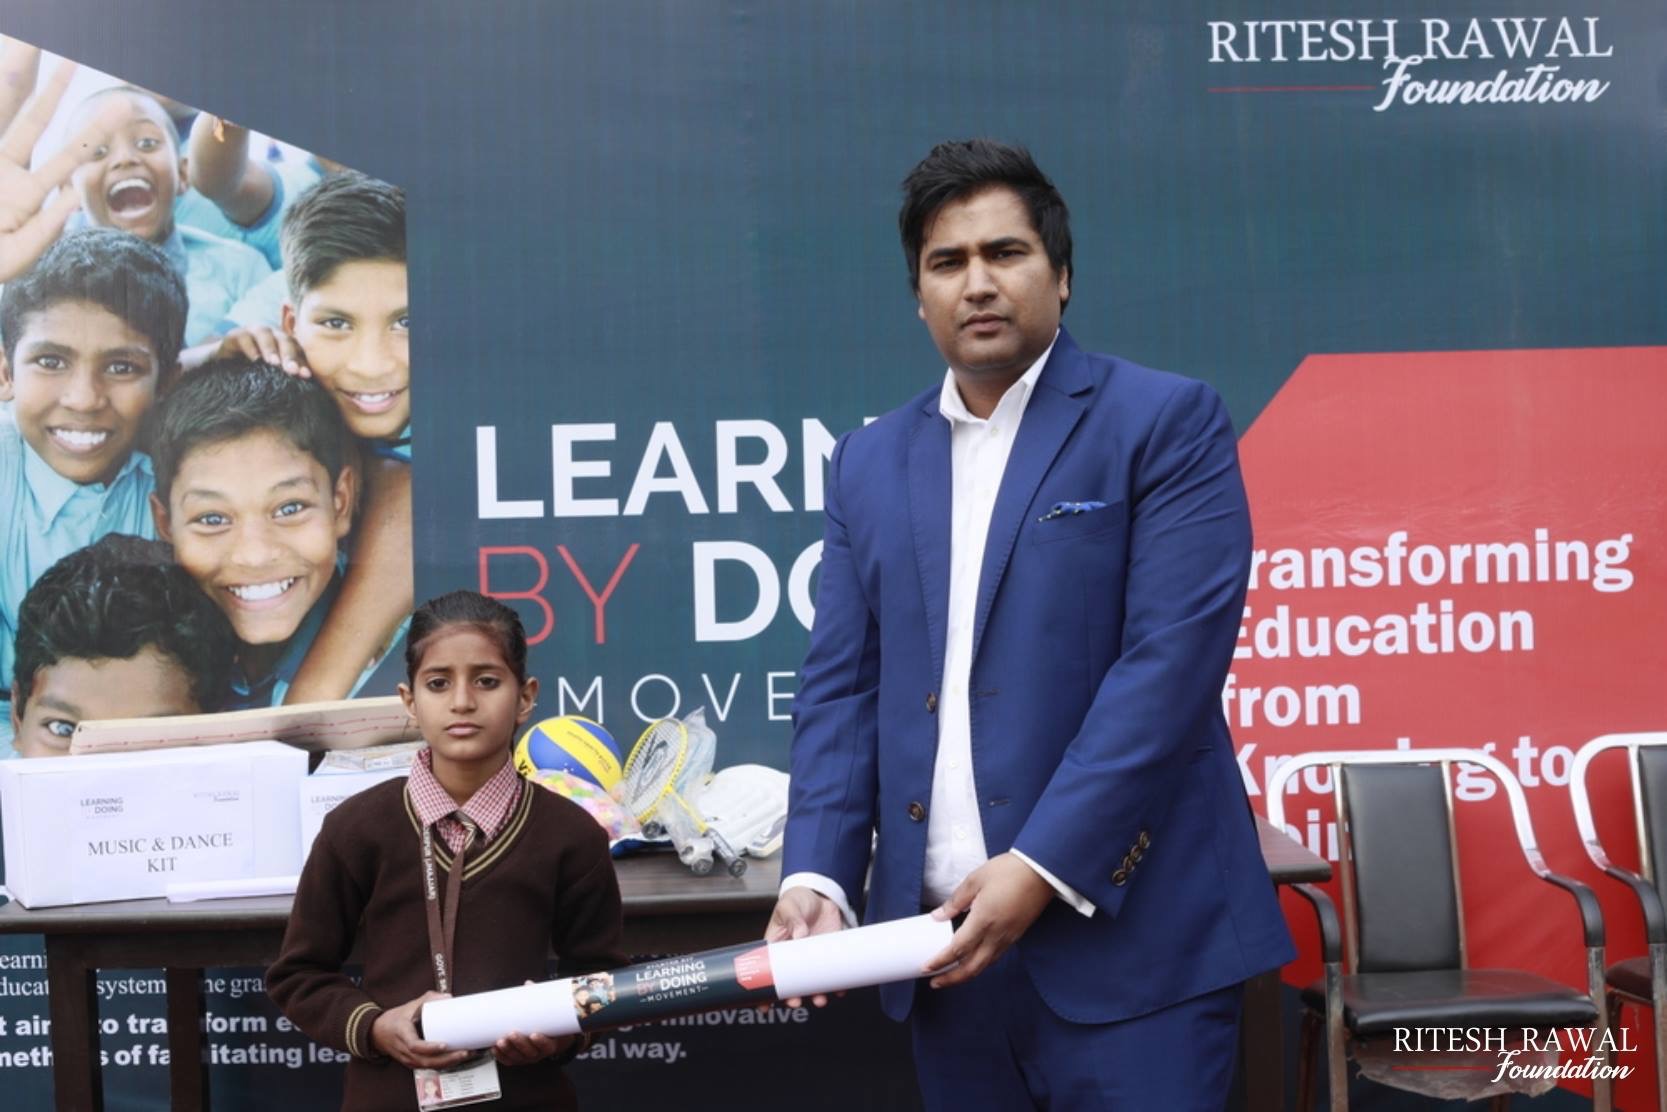 on-world-child-labor-day-ritesh-rawal-foundation-launches-learning-by-doing-movement